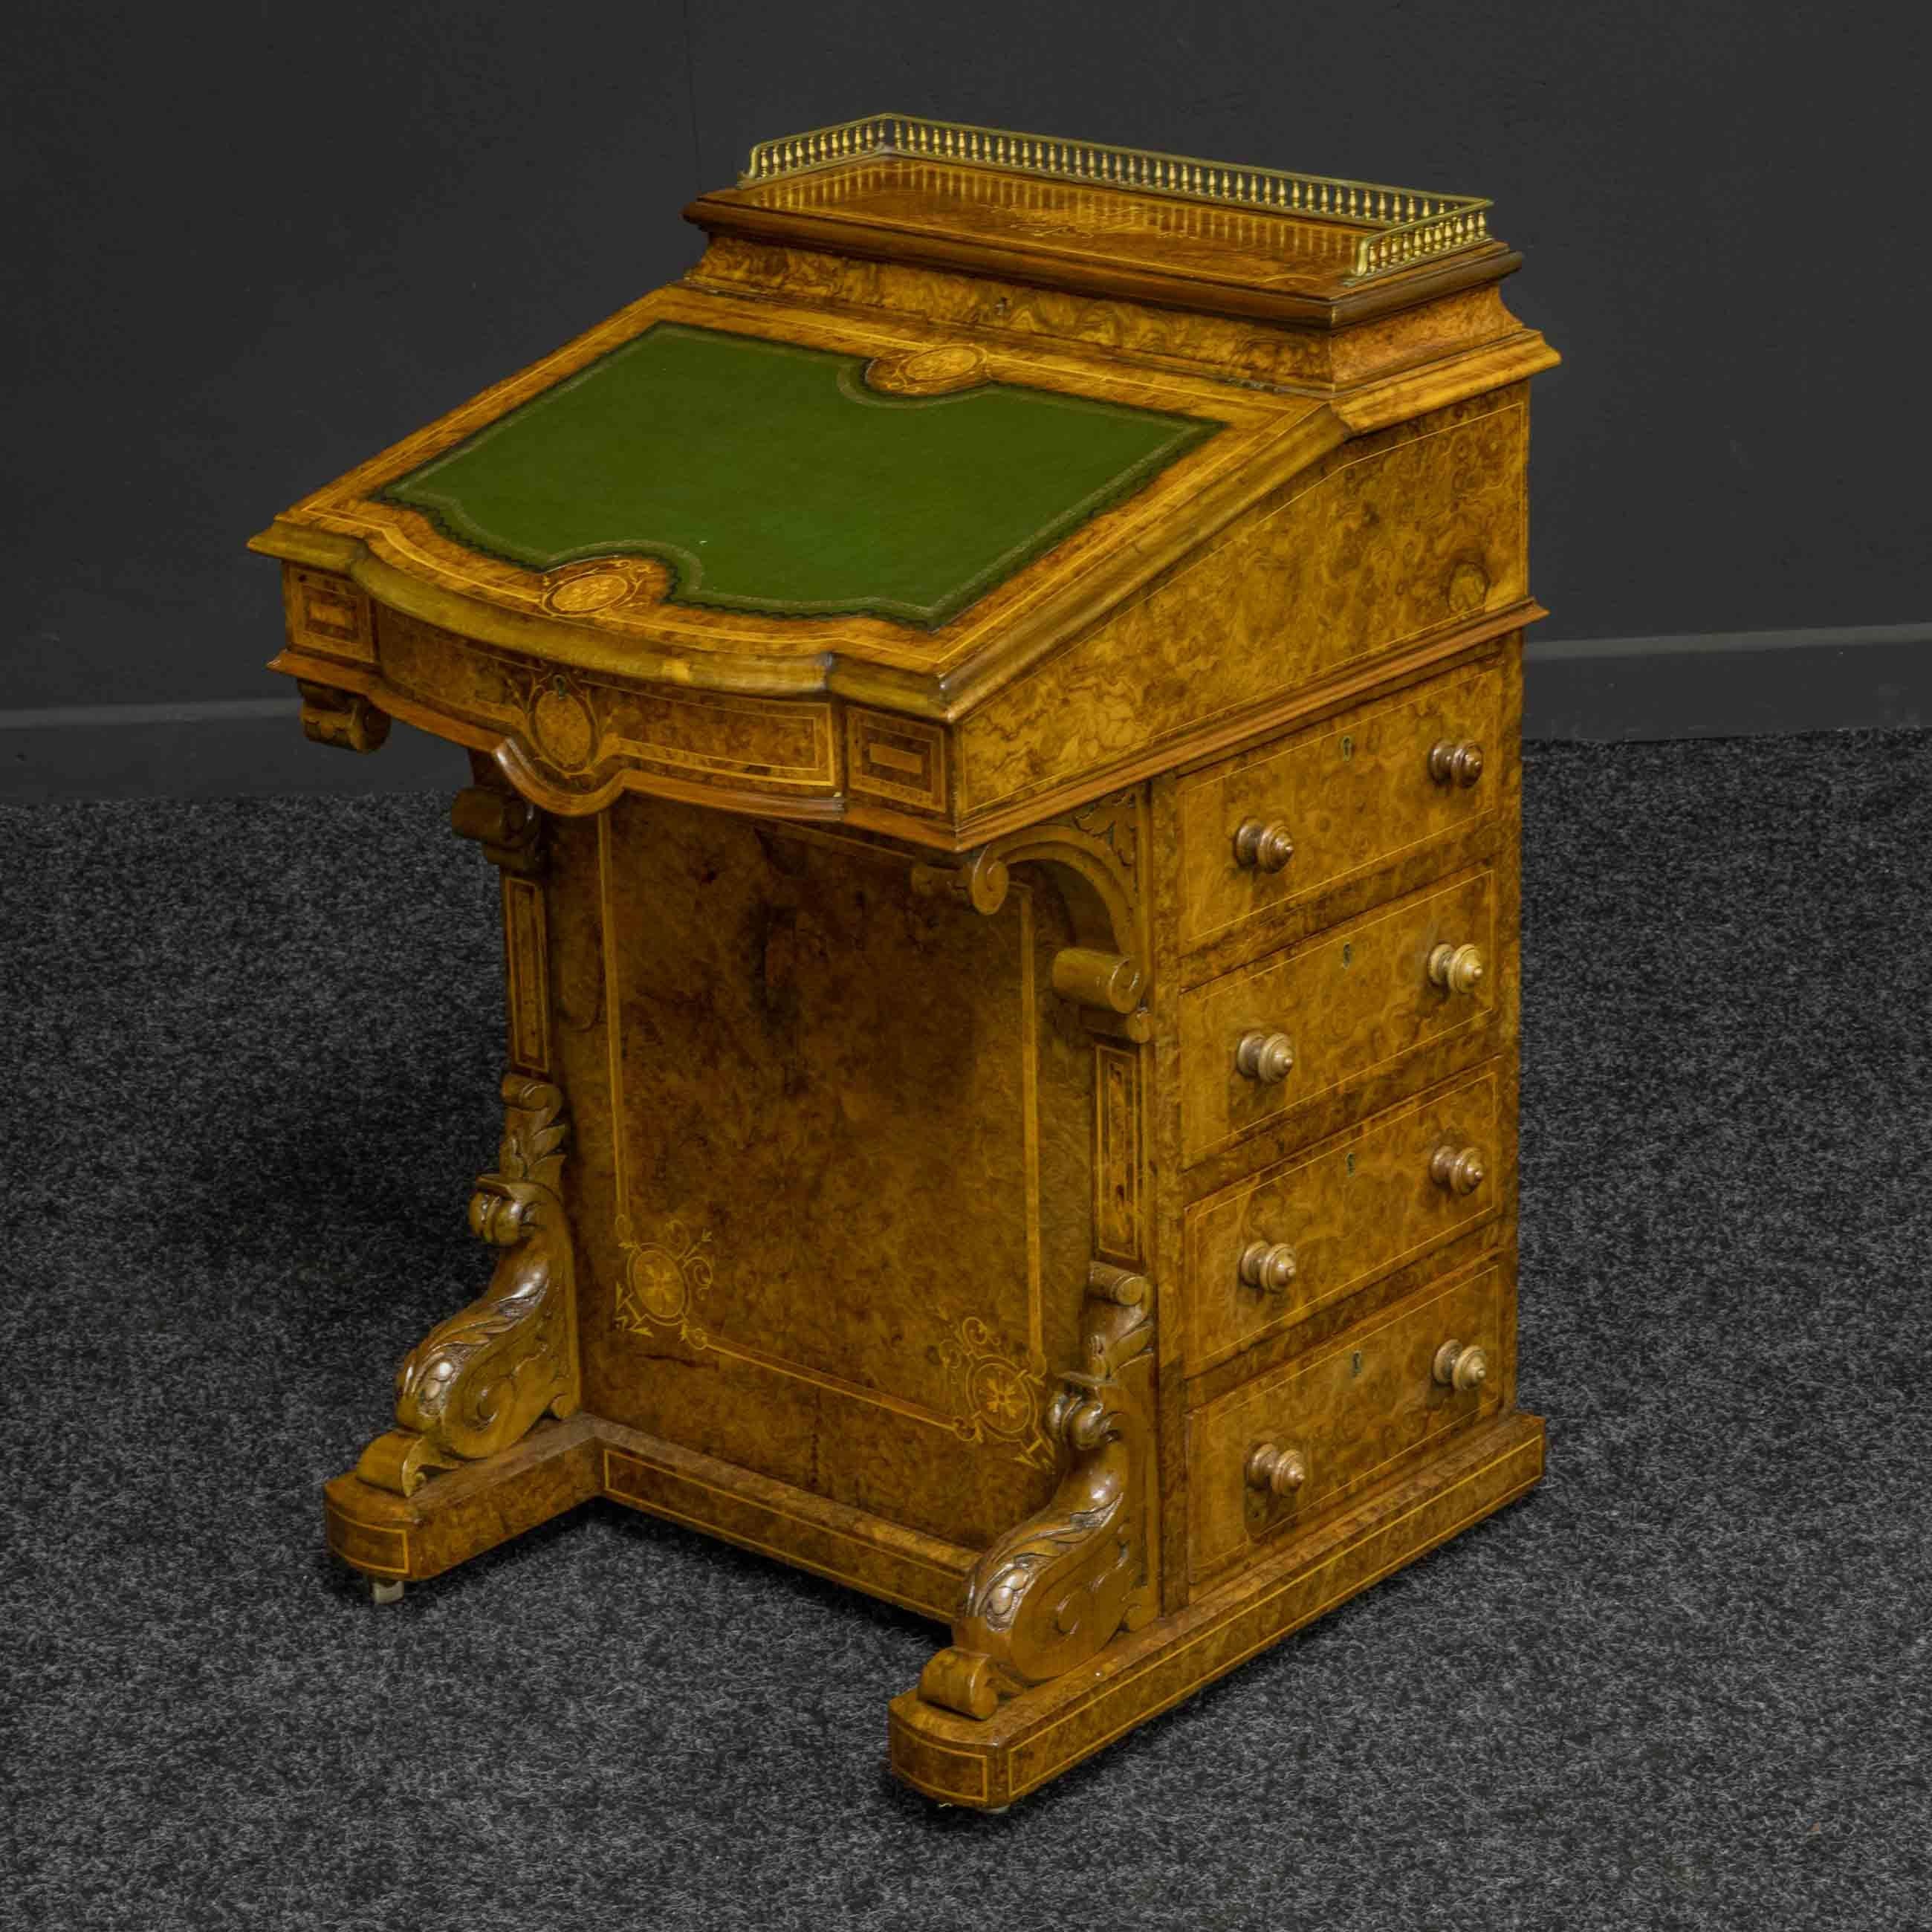 A superb Victorian burr walnut veneered Davenport beautifully decorated with inlaid crossbanding, stringing and more detailed panels. With dummy drawers to one side and real ones to the other side. All the knobs are crisply turned and not chipped.